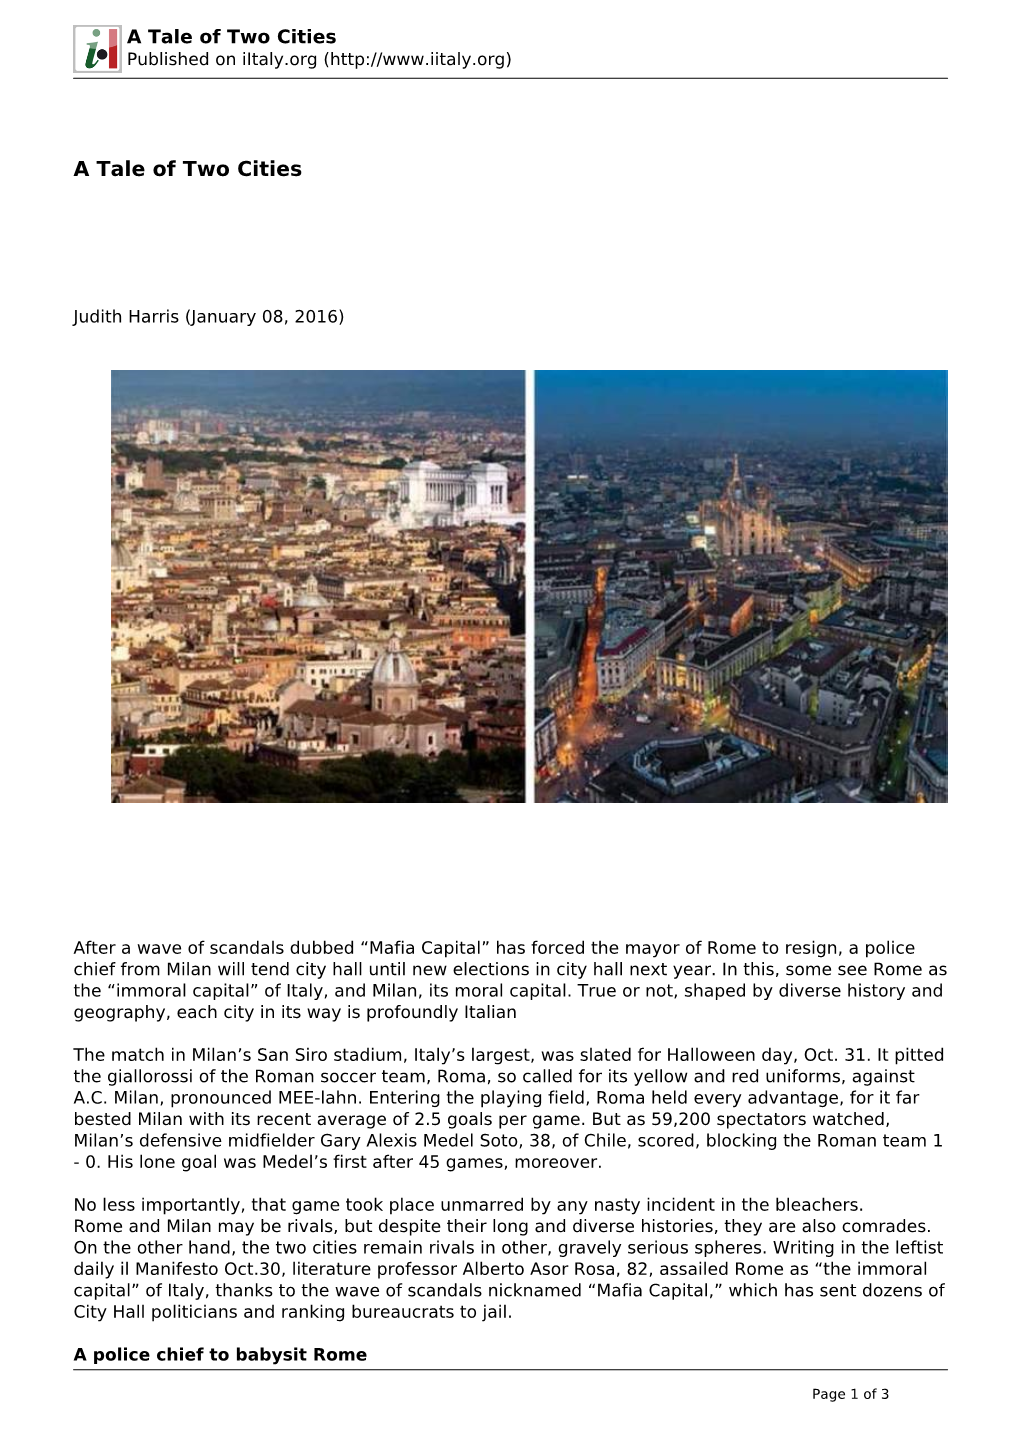 A Tale of Two Cities Published on Iitaly.Org (